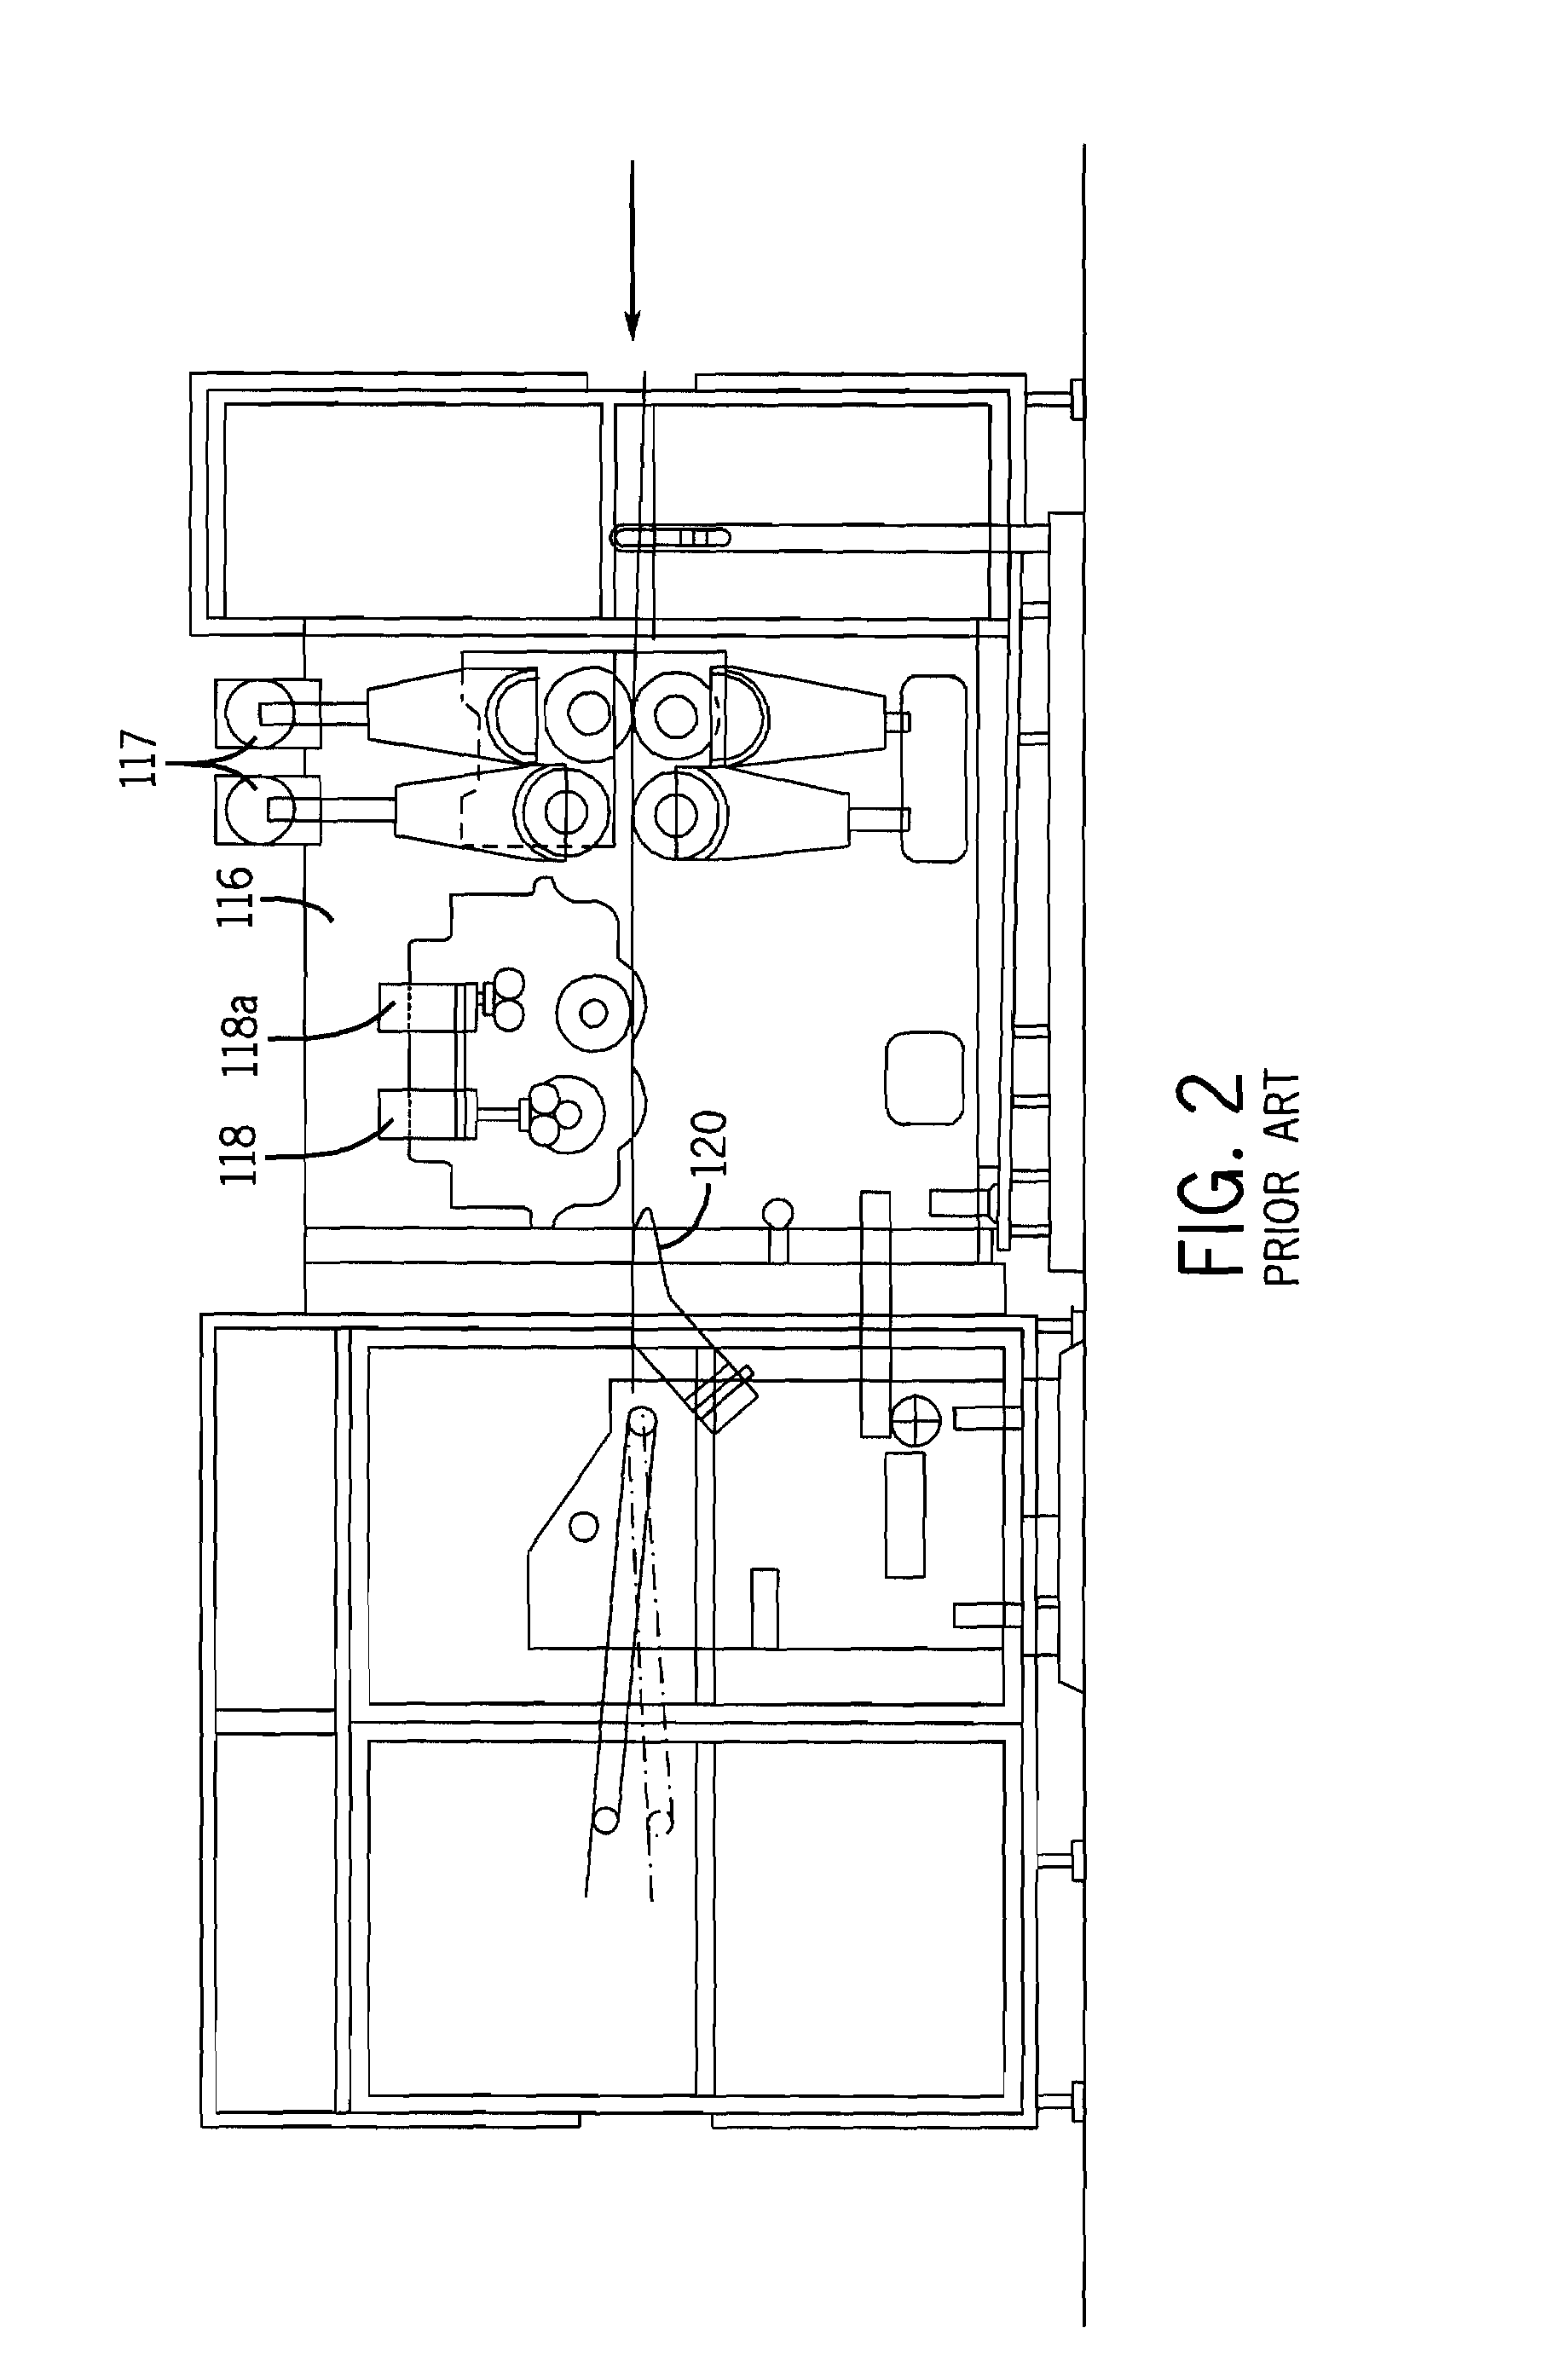 Method and apparatus for a rules-based utilization of a minimum-slit-head configuration plunger slitter